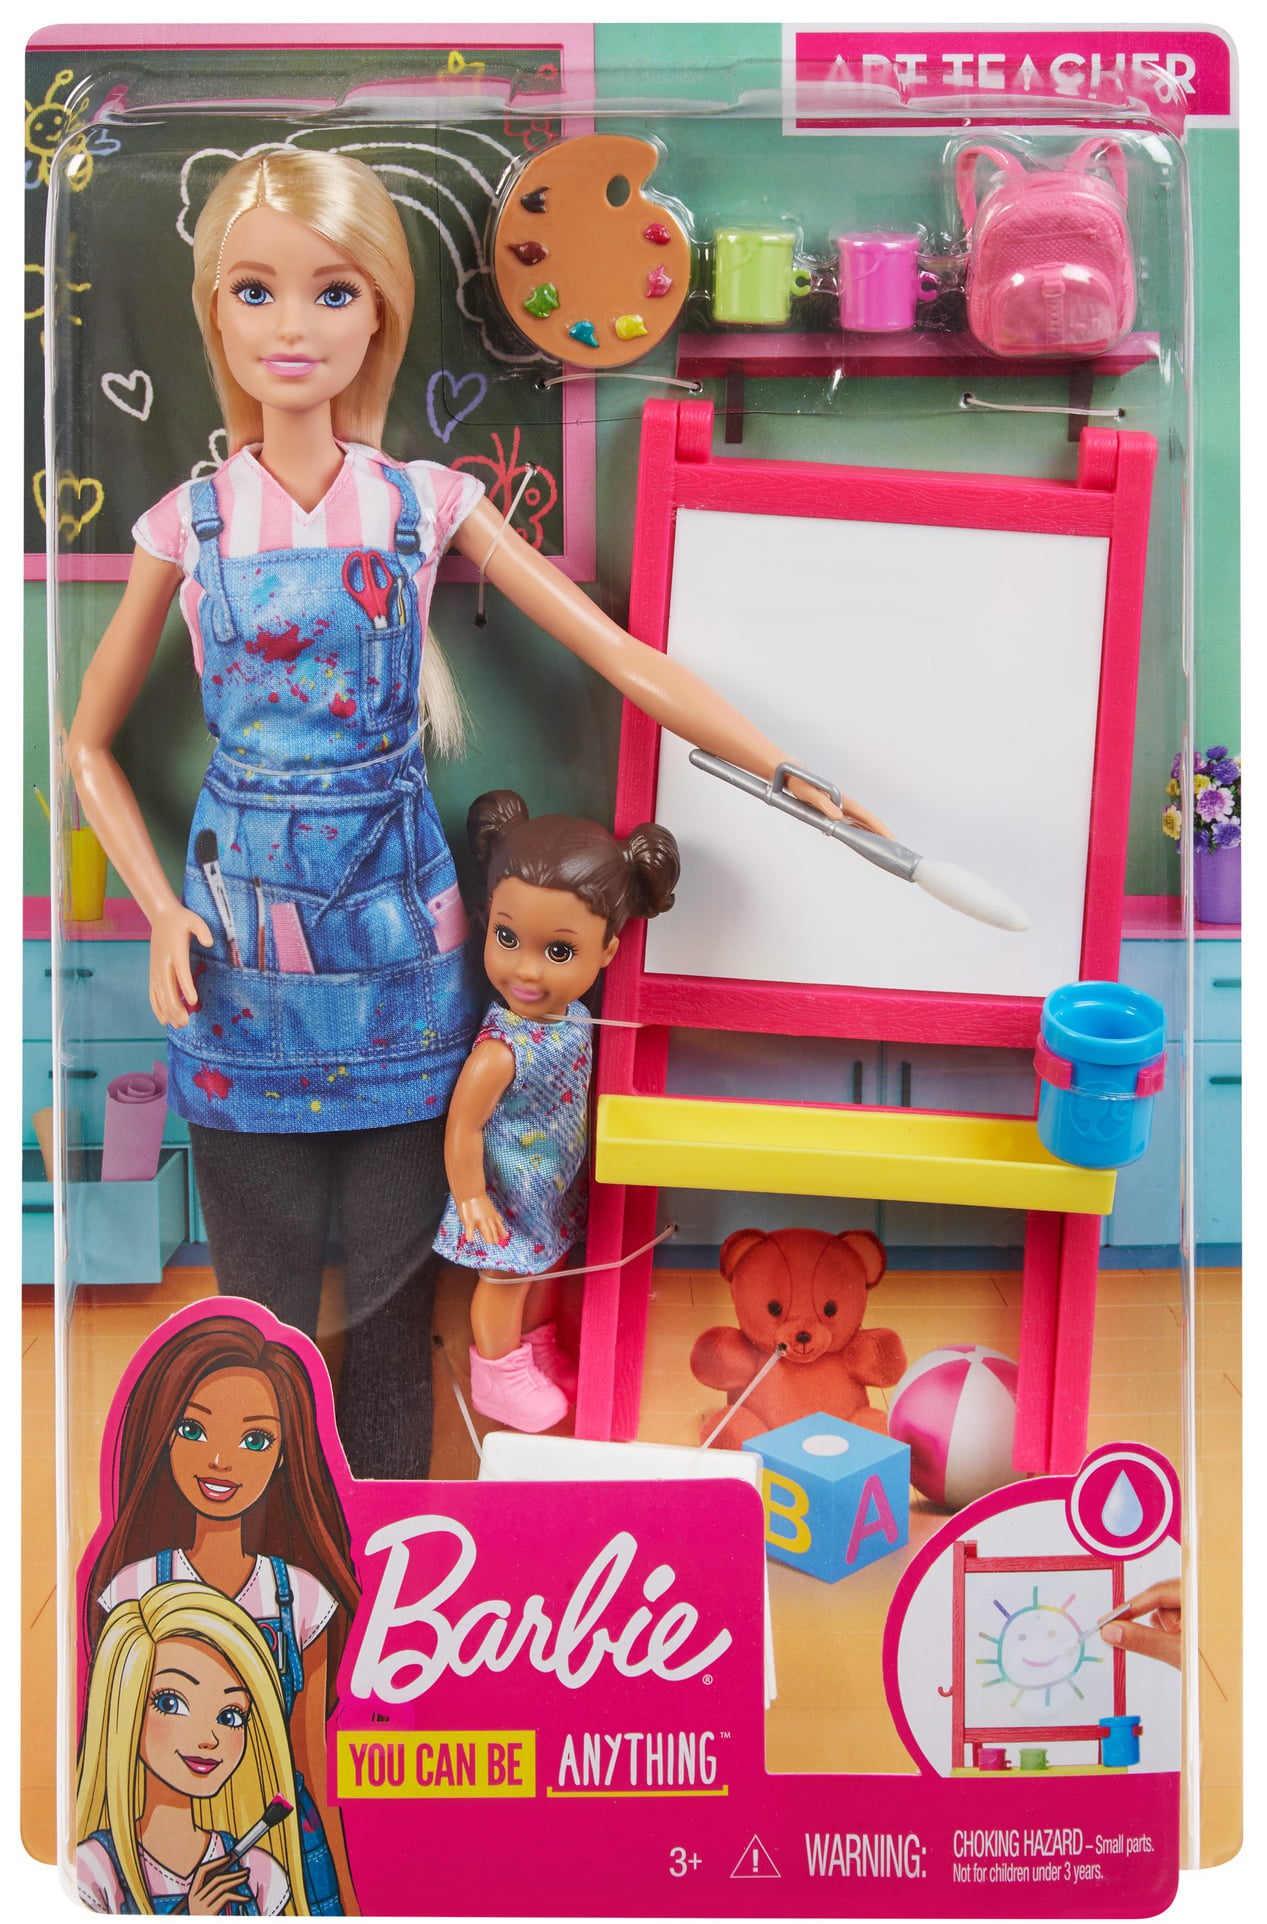 Barbie Careers Art Teacher Playset with Blonde Fashion Doll, 1